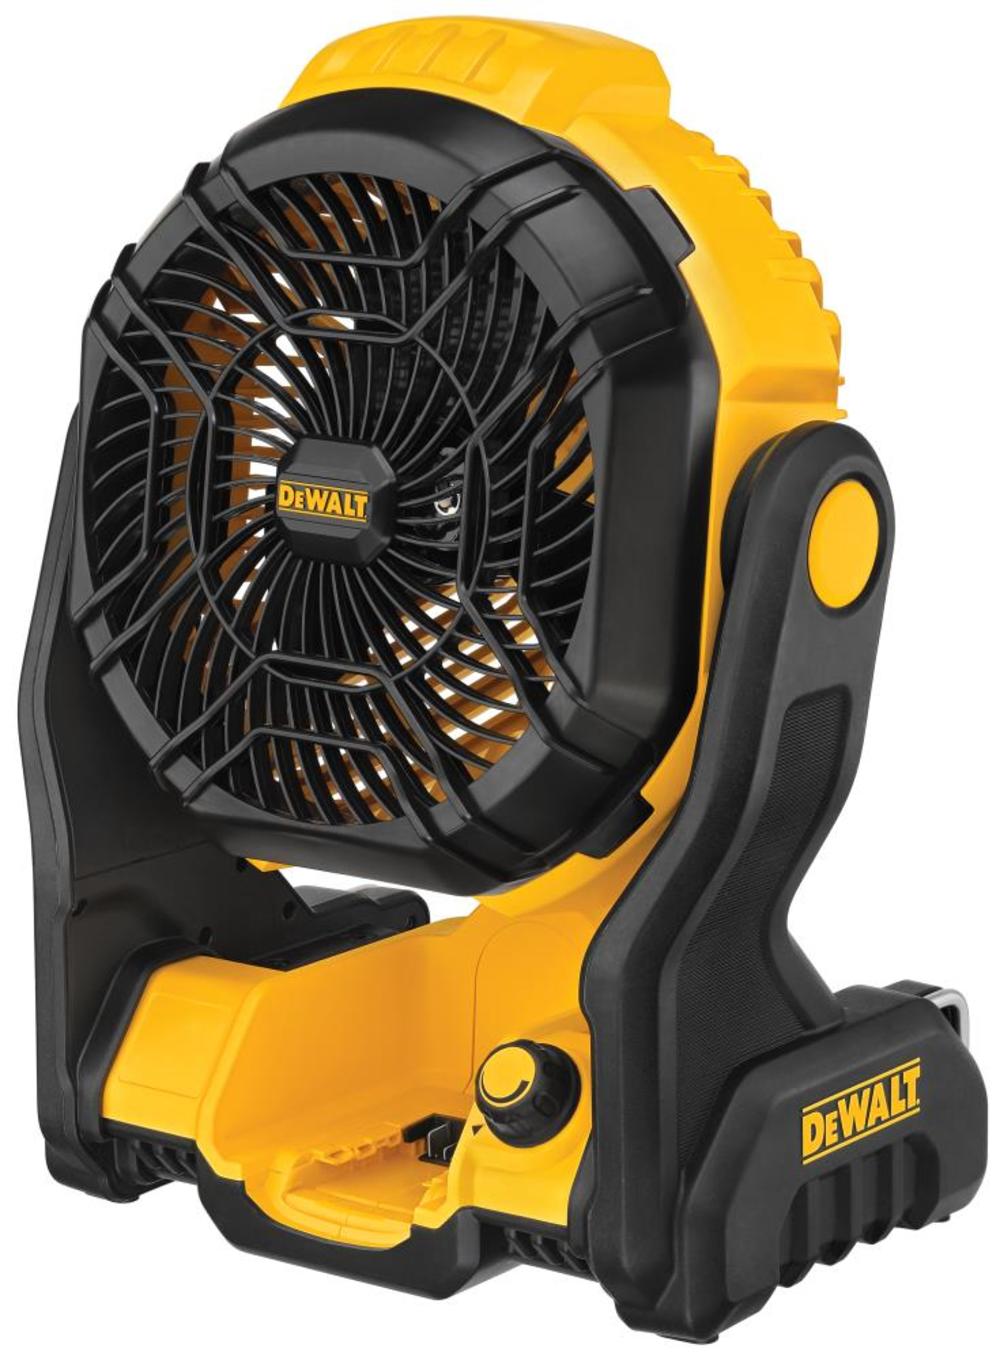 DW 20V MAX Jobsite Fan Bare Tool DCE512B from DW